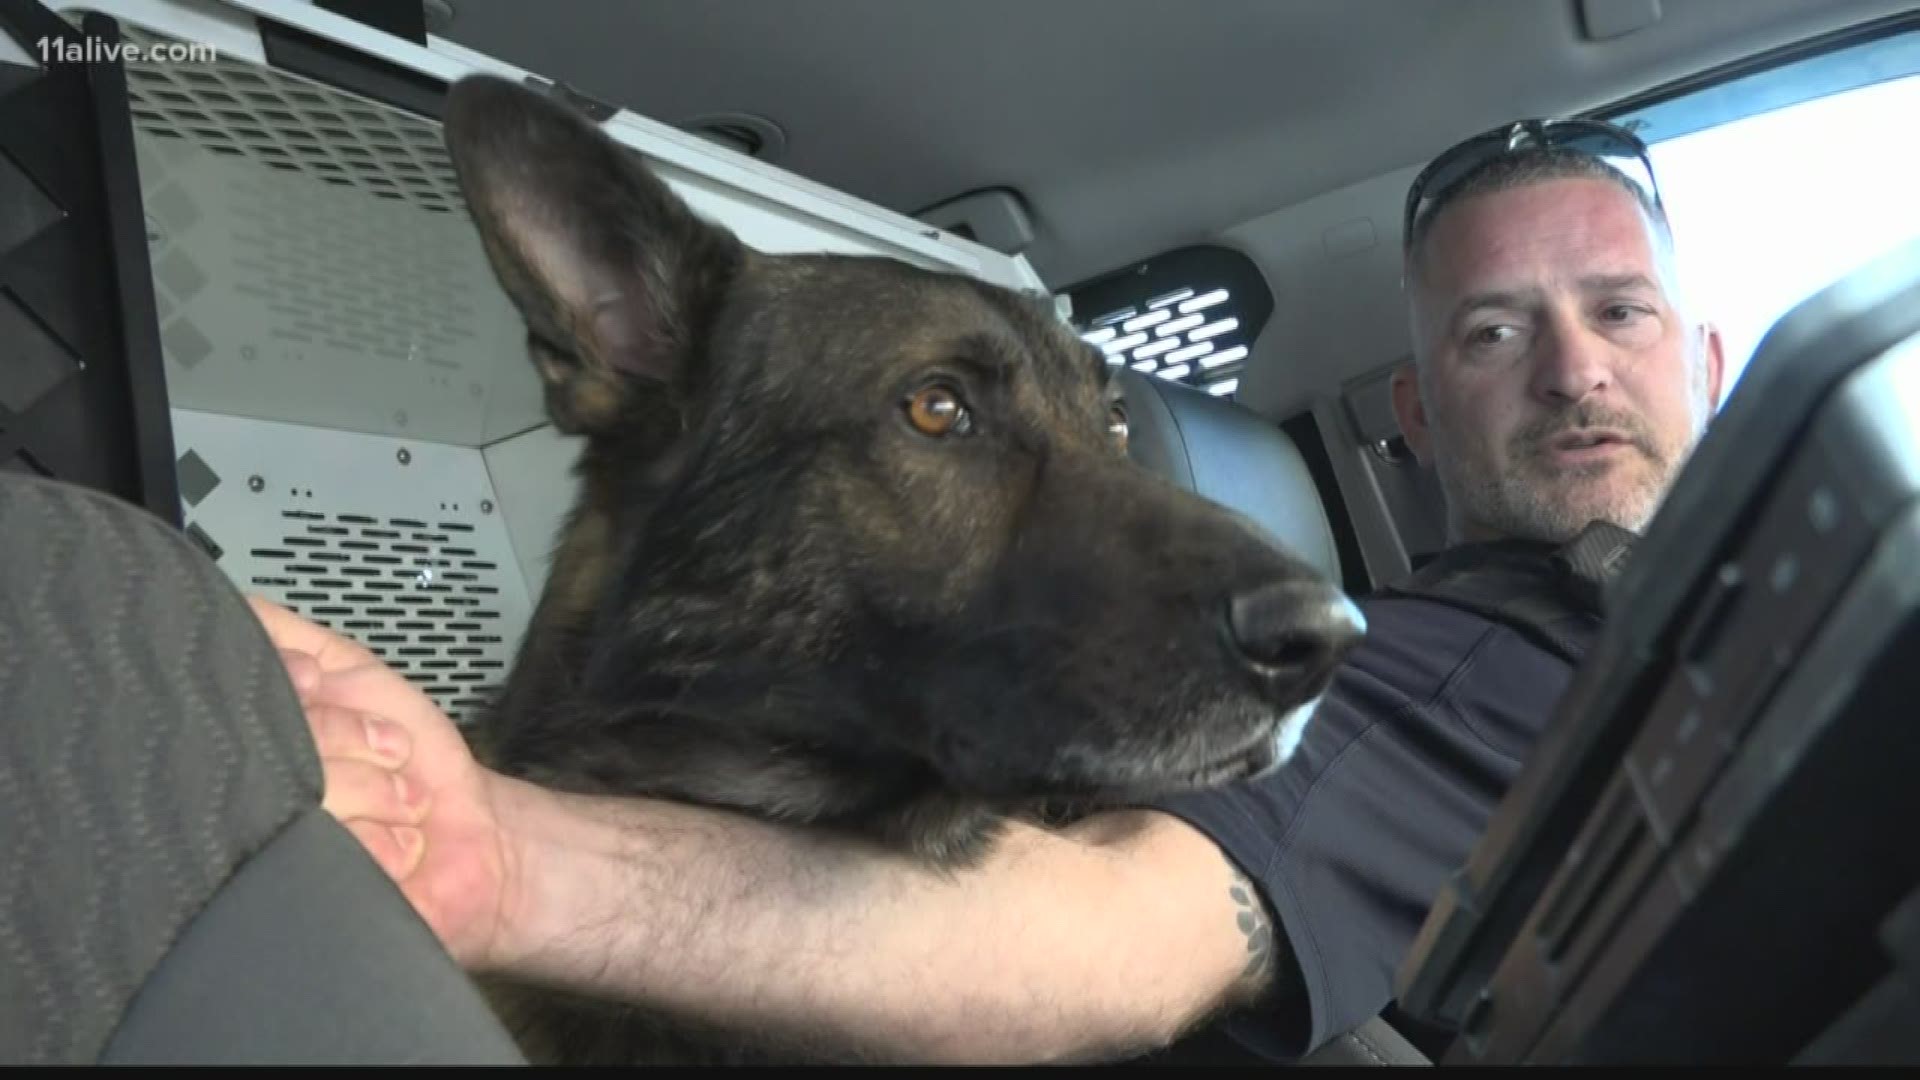 Lawrenceville K-9 police officer helping curb porch pirates | 11alive.com